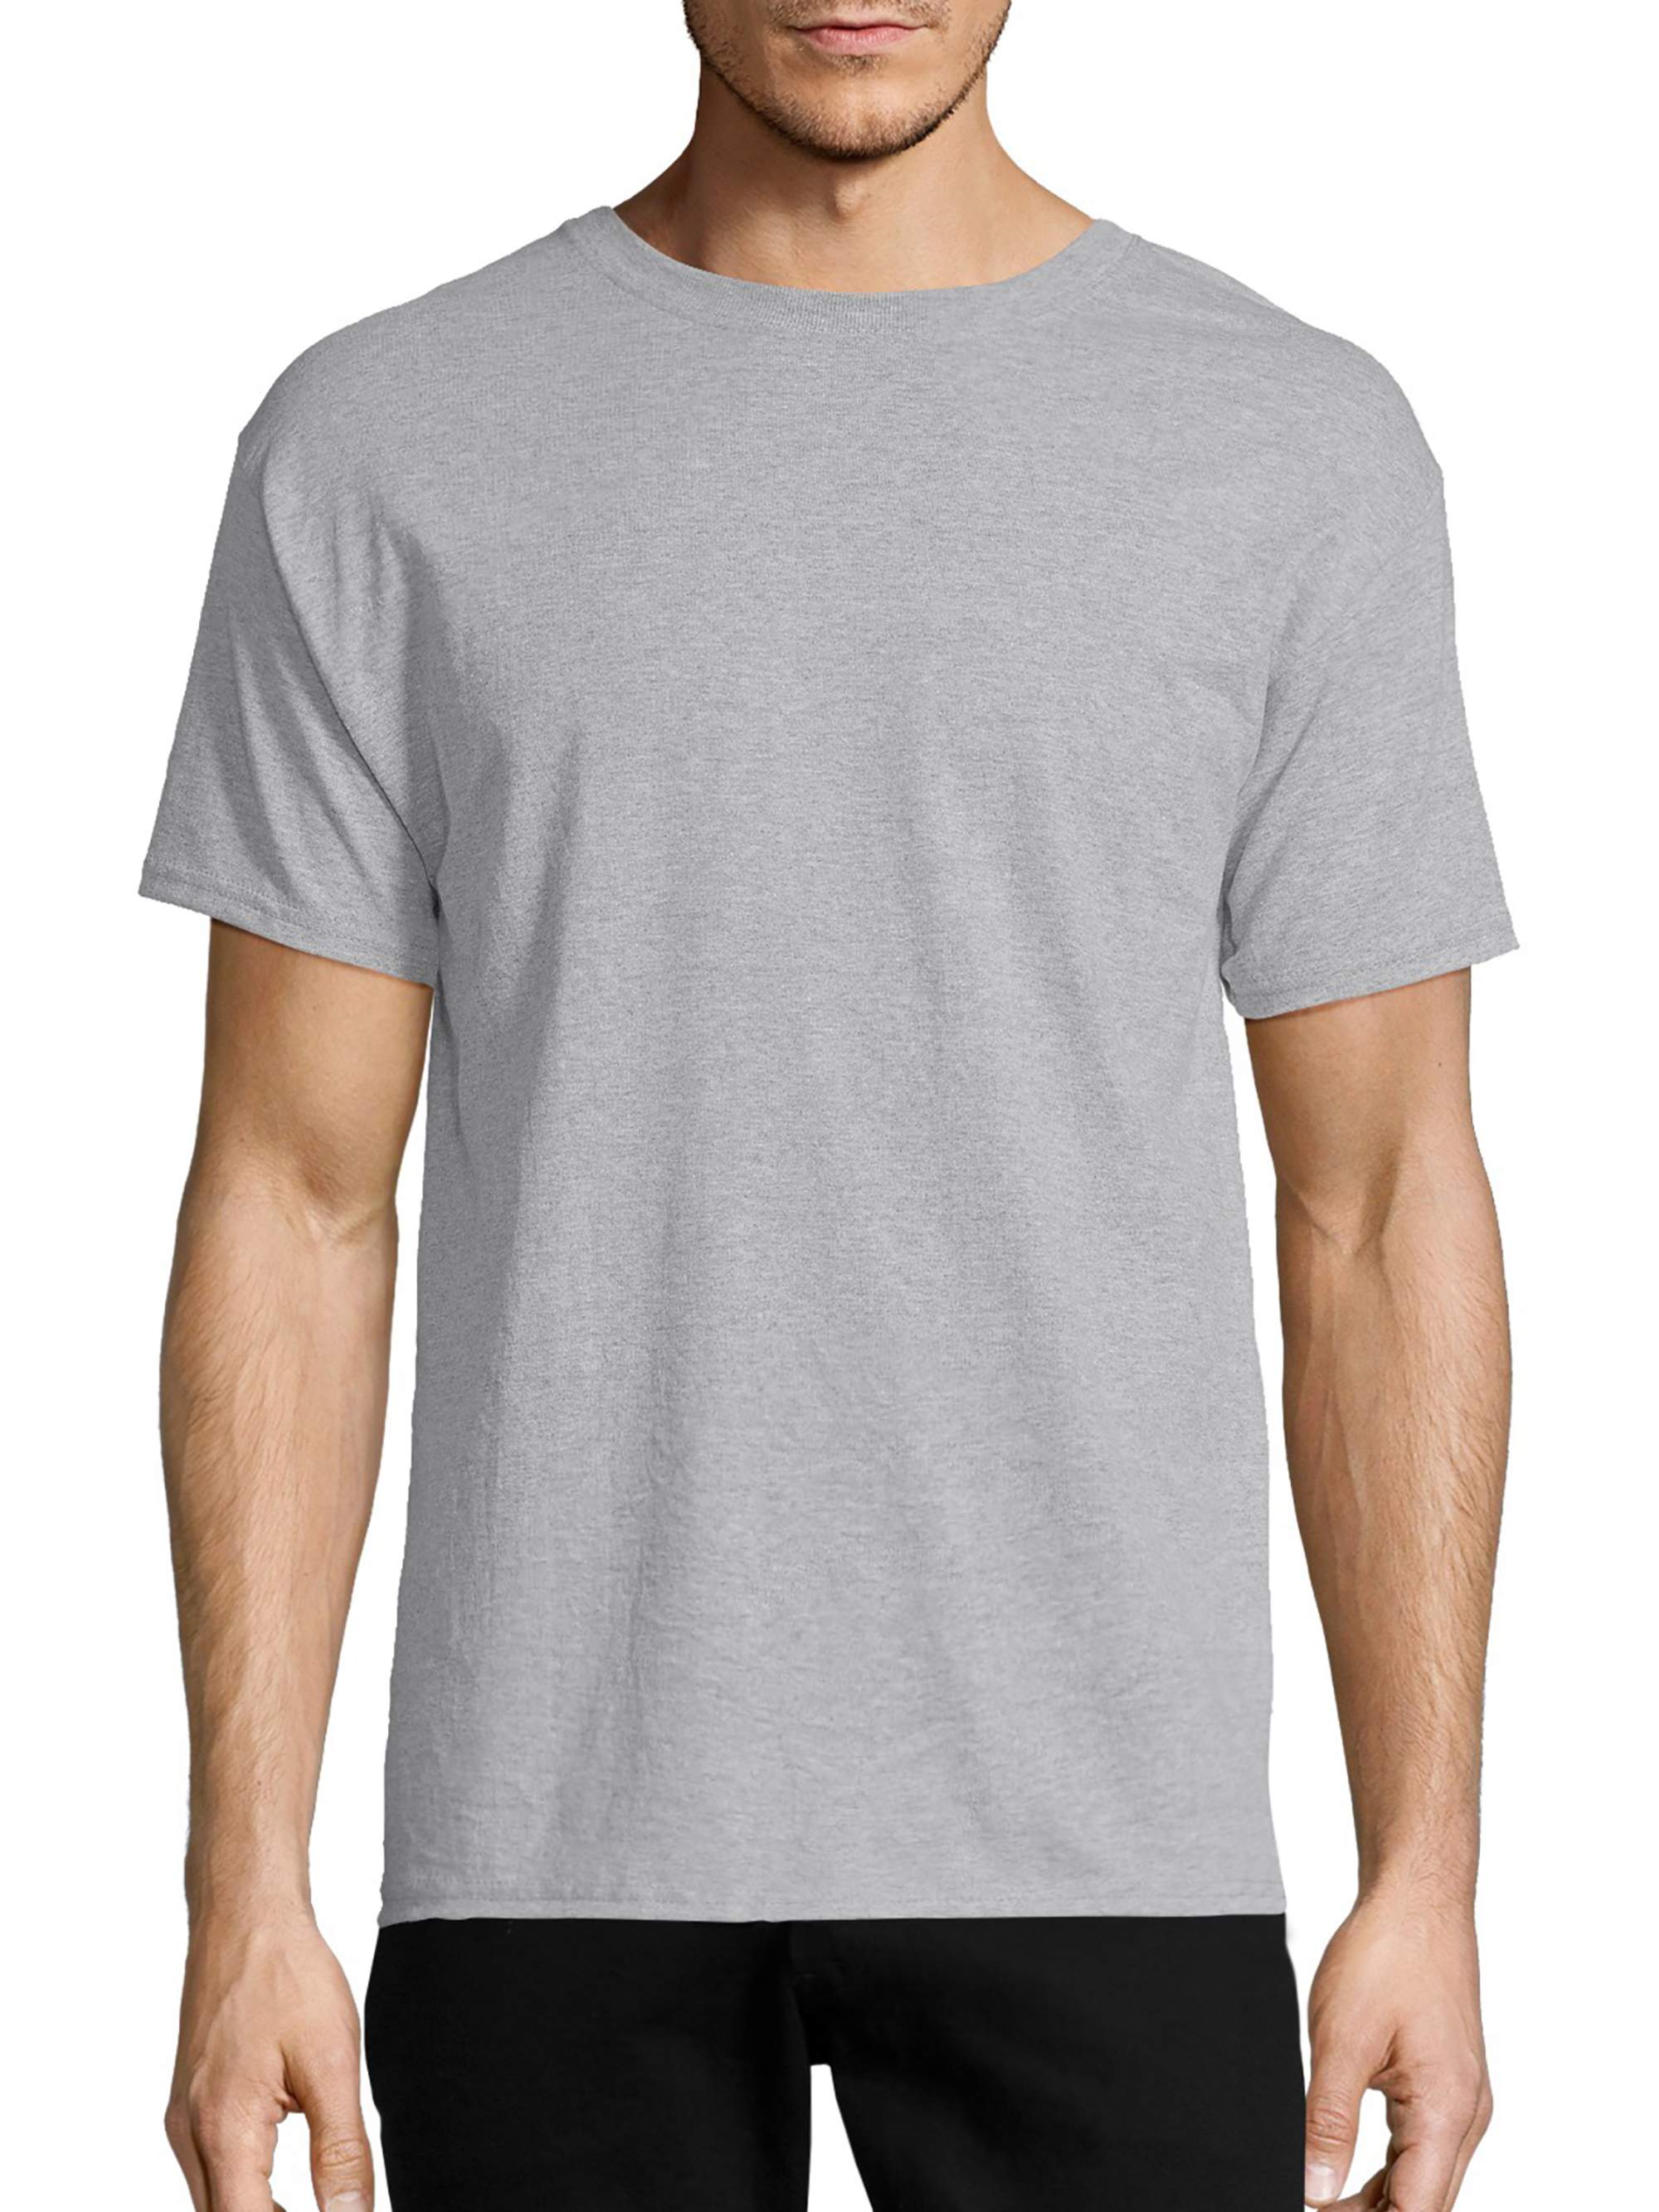 Hanes Men's and Big Men's Ecosmart Short Sleeve Tee, Up To Size 3XL - image 1 of 4